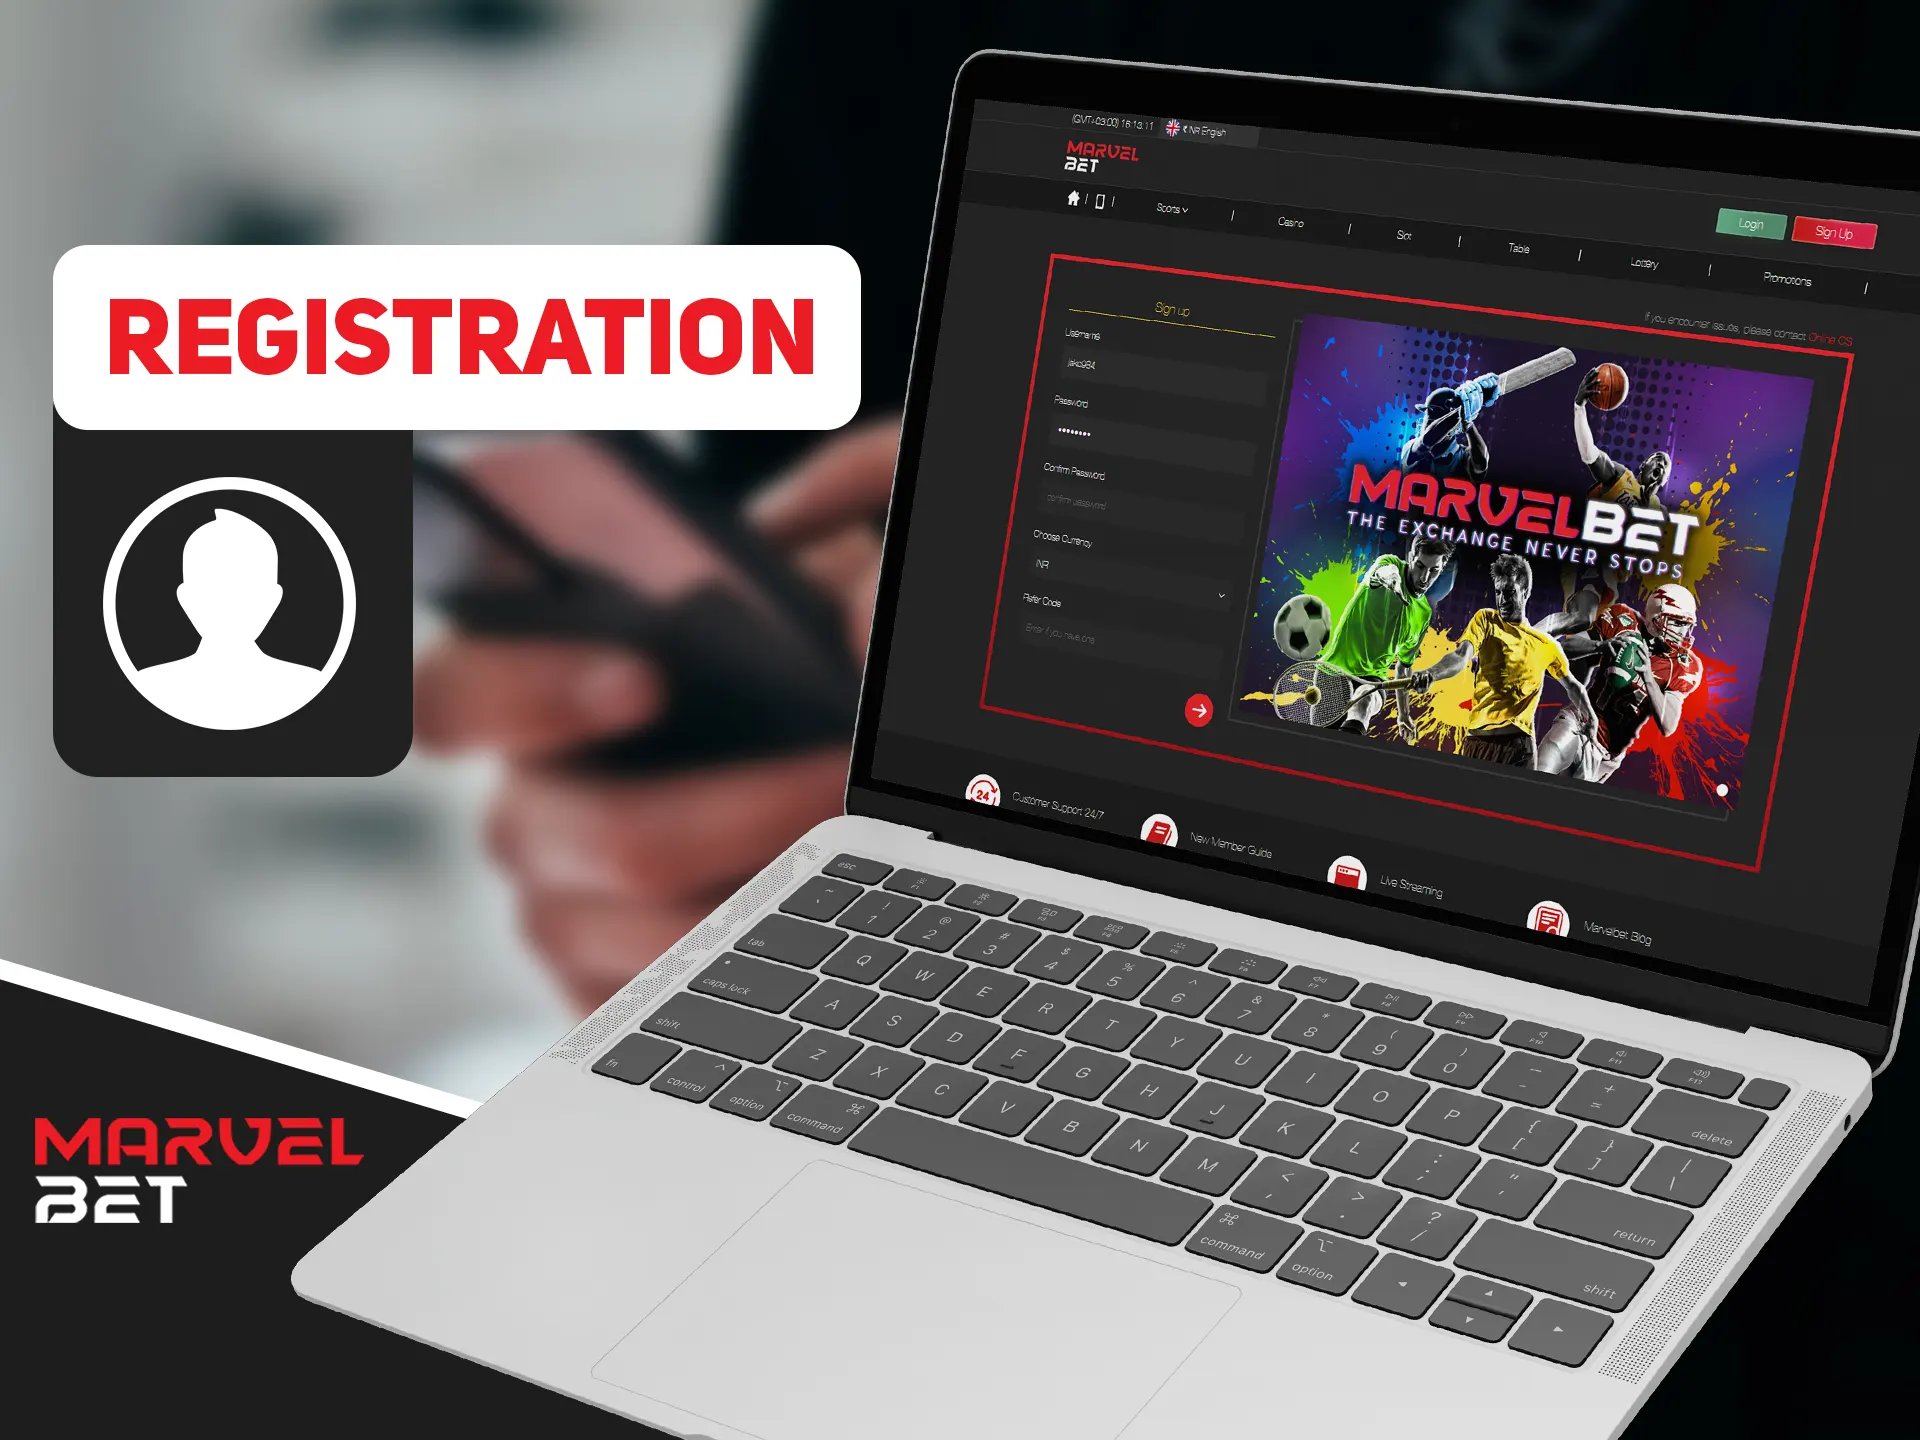 Register new Marvelbet account by clicking on sign up button.